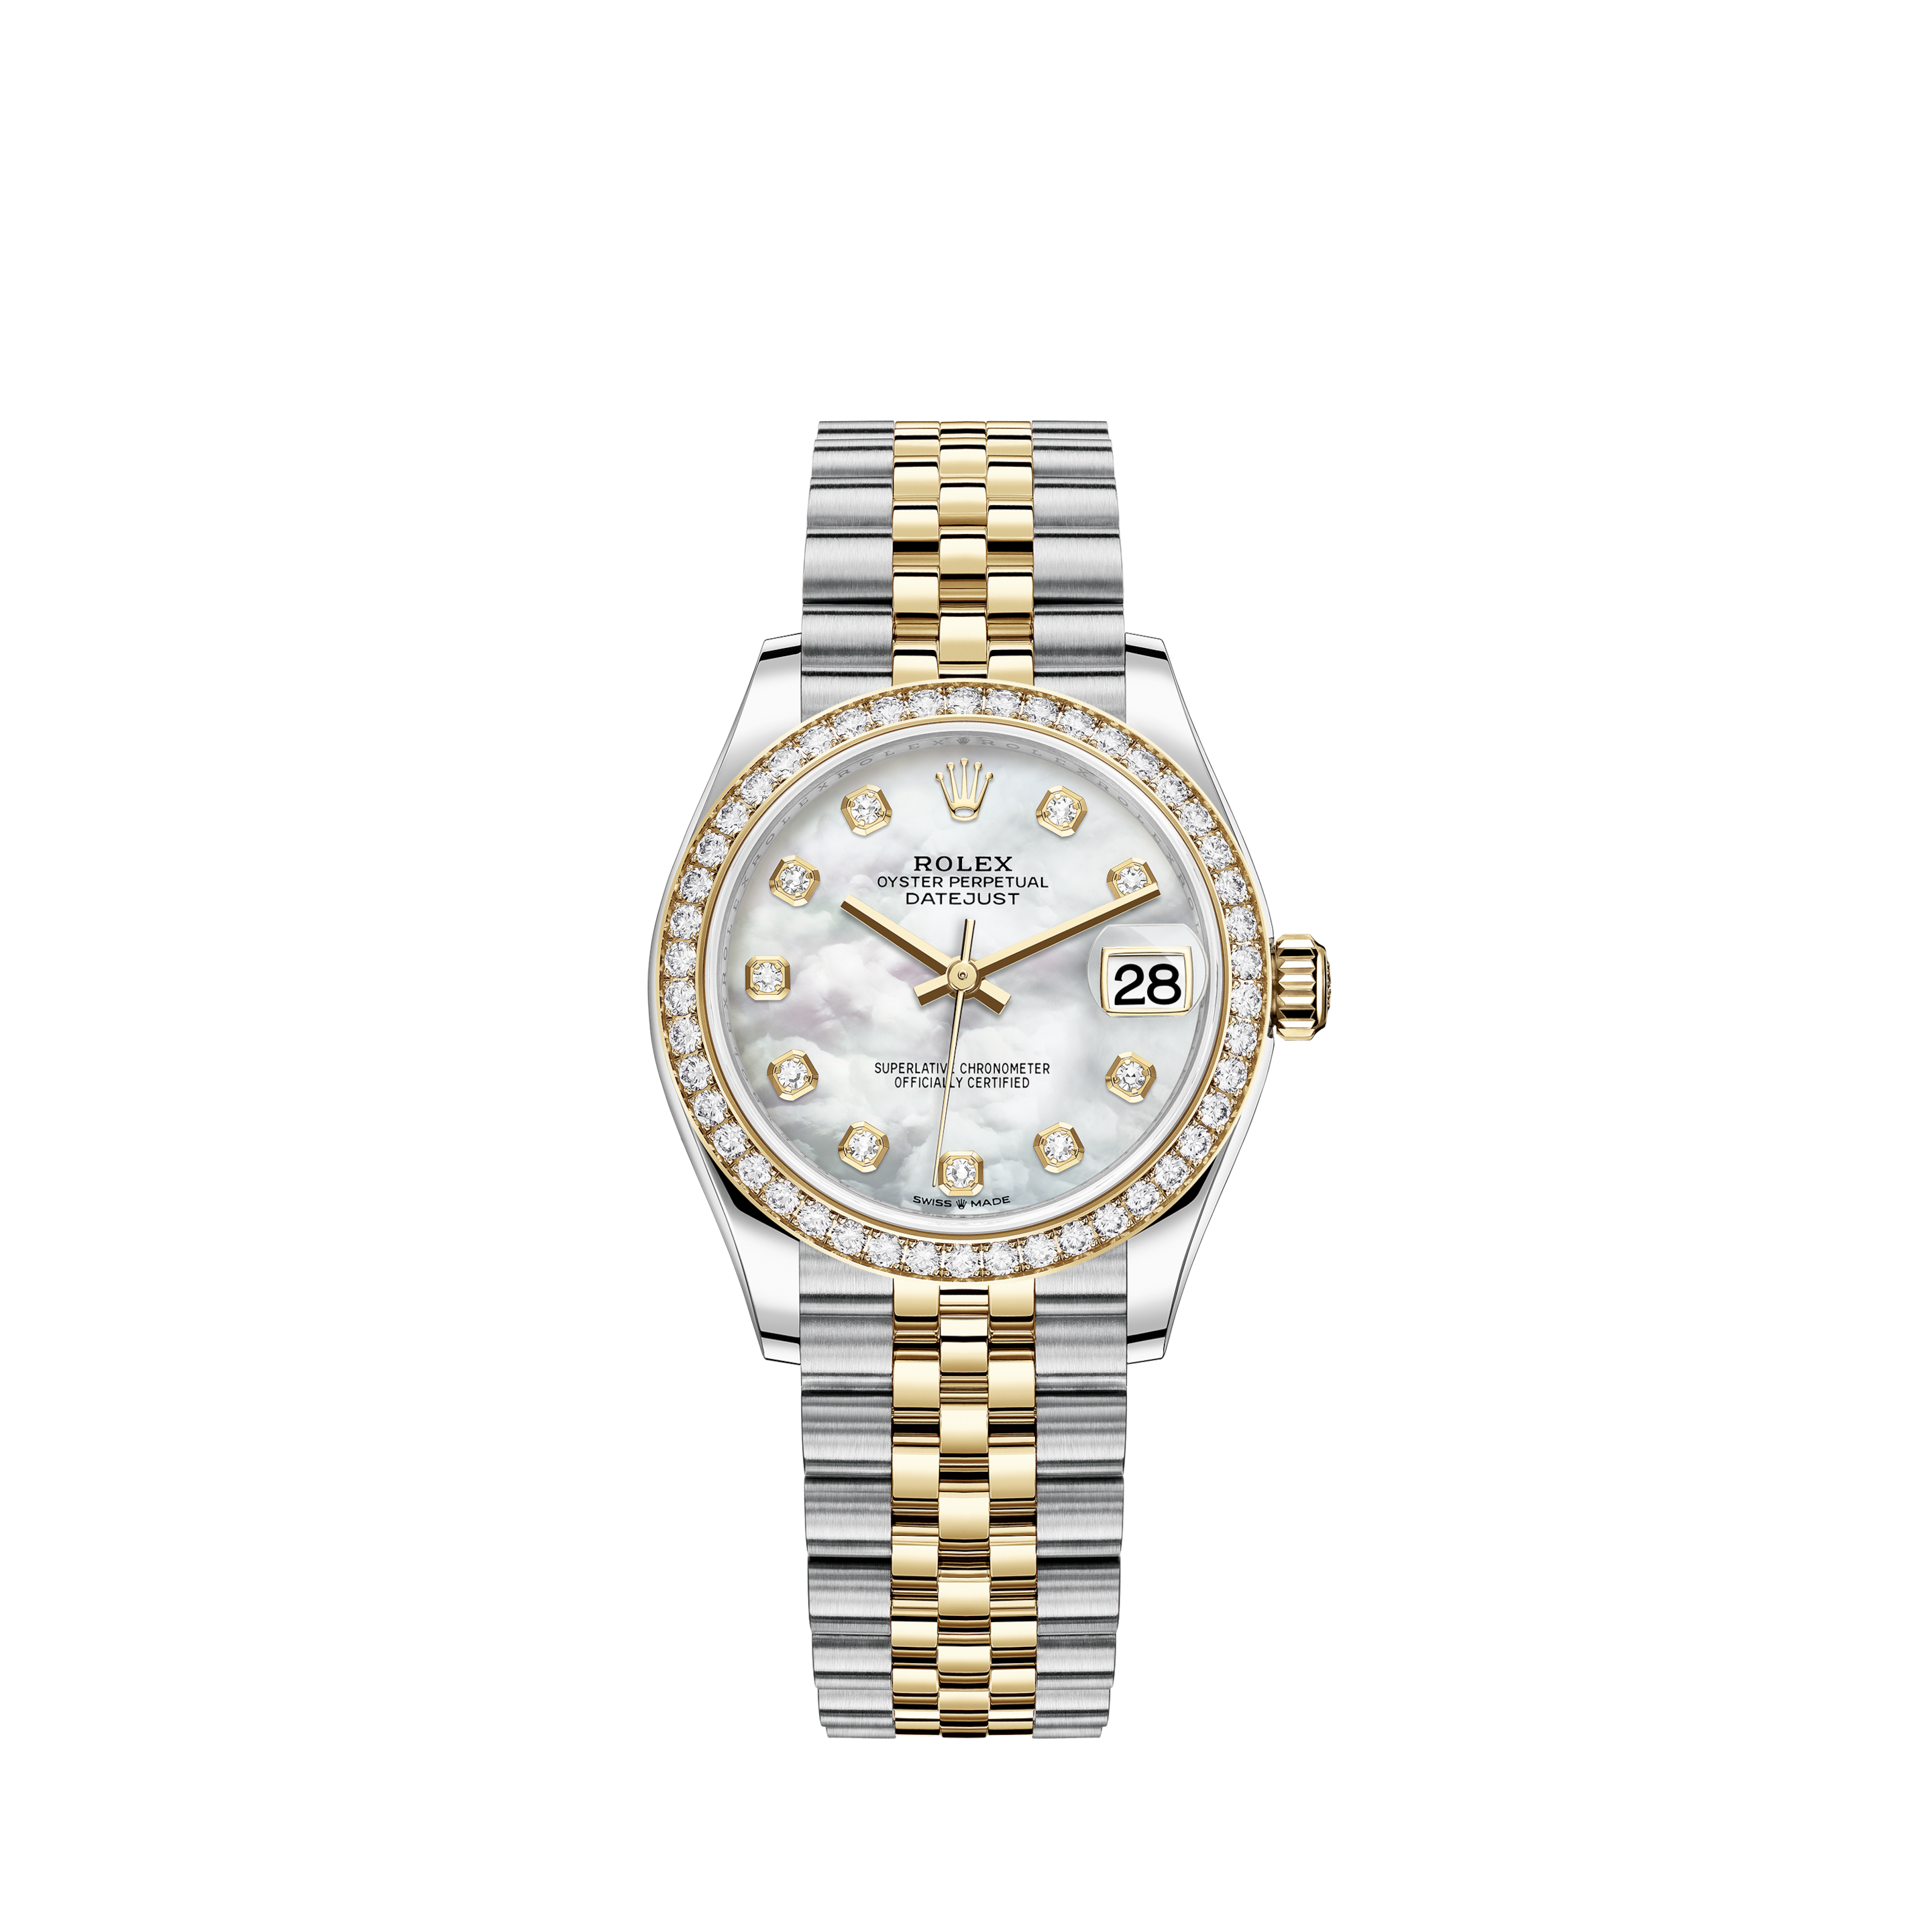 Rolex Day-Date Yellow gold 18K gold dial box and paper